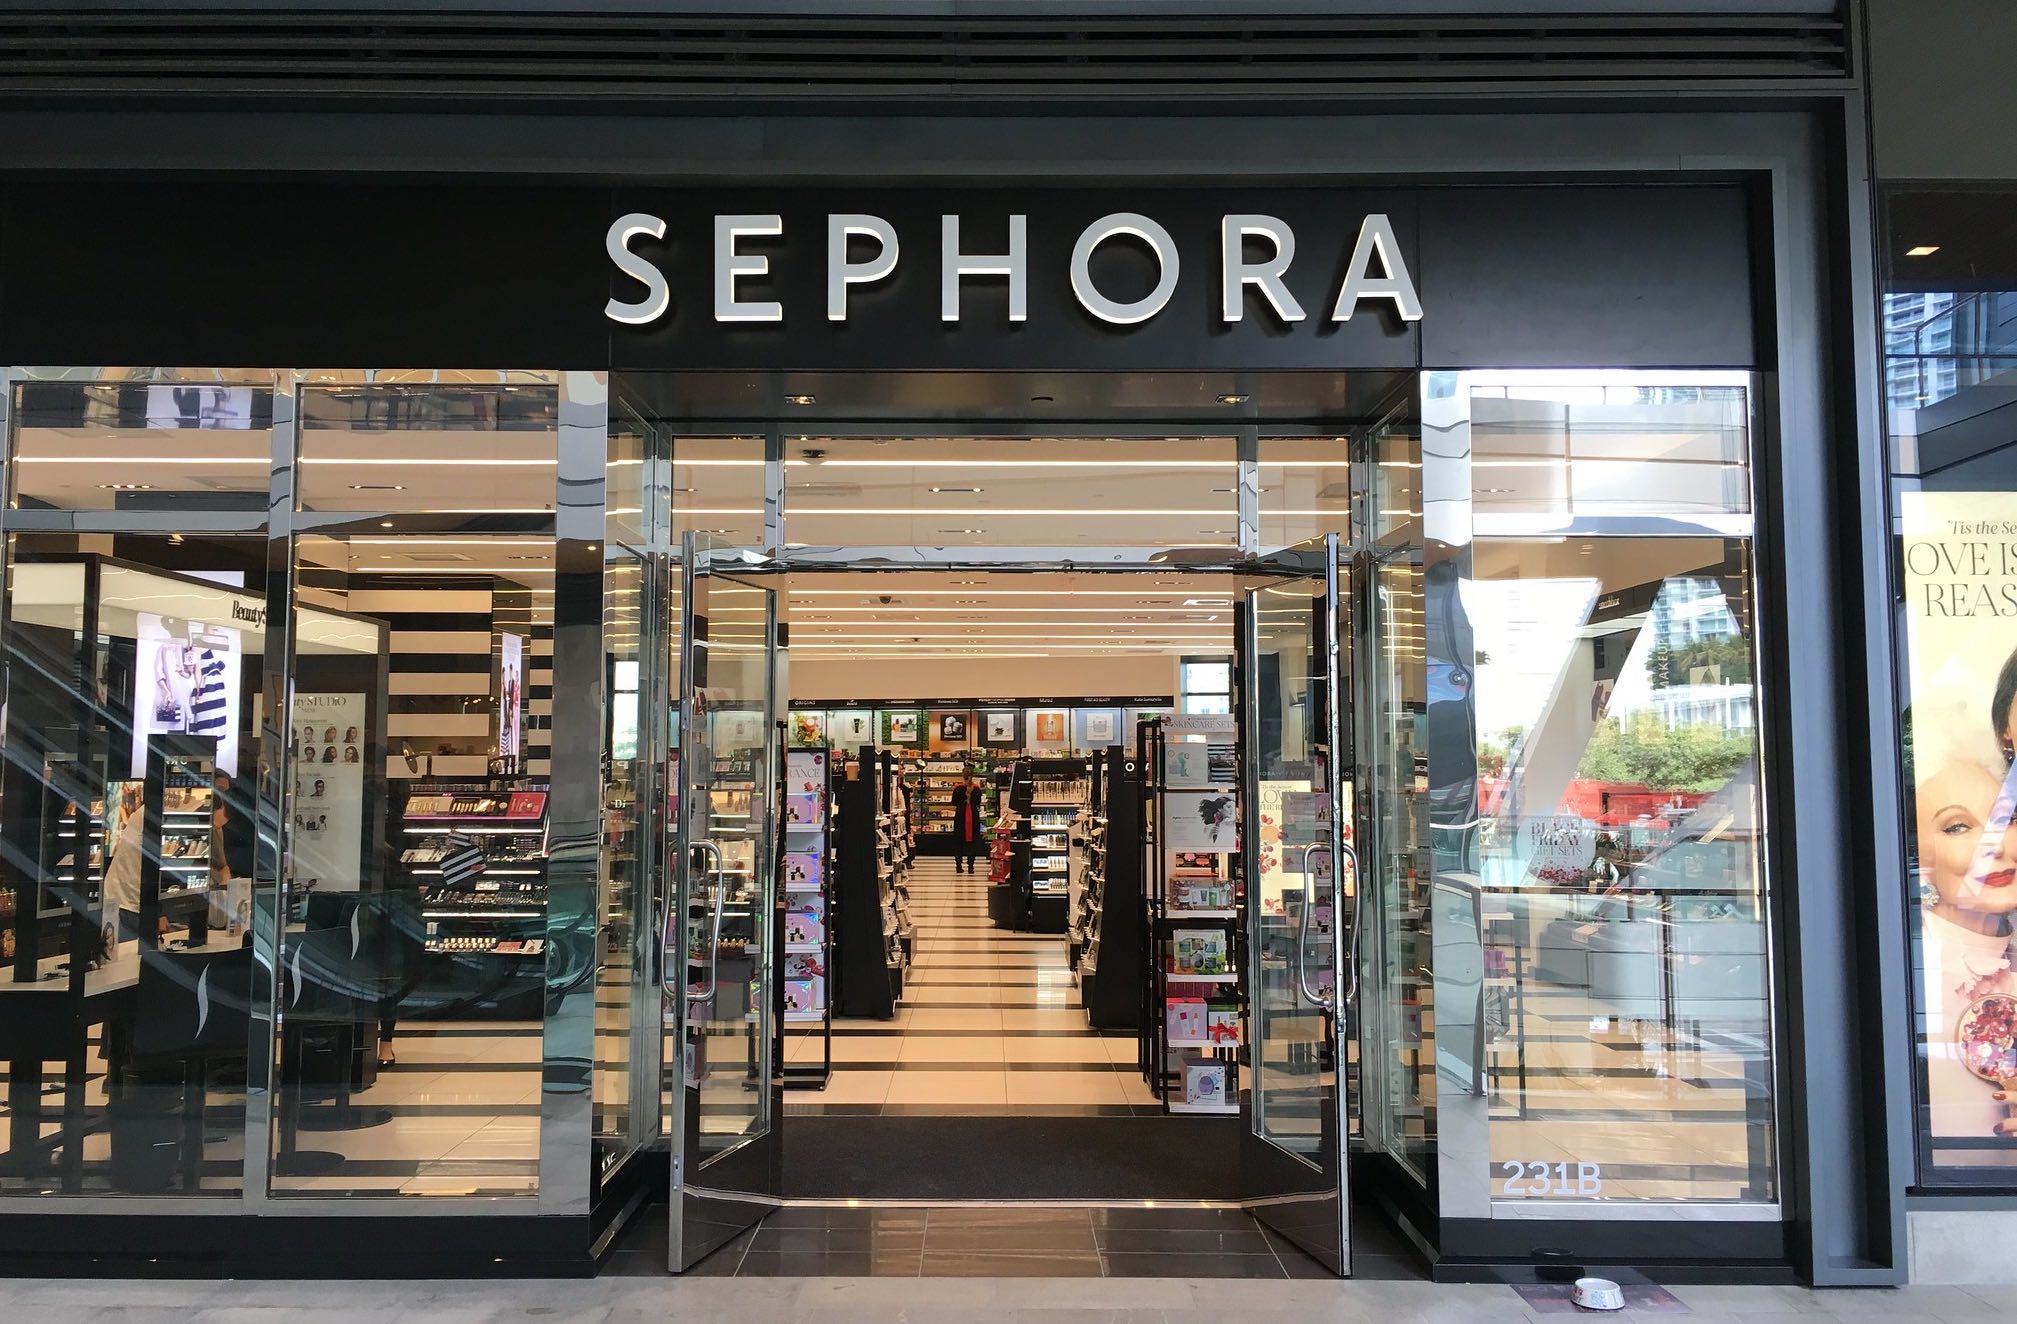 A Sephora outlet in the US. The brand is returning to Hong Kong next month after a long absence. Photo via Flickr/Phillip Pessar.